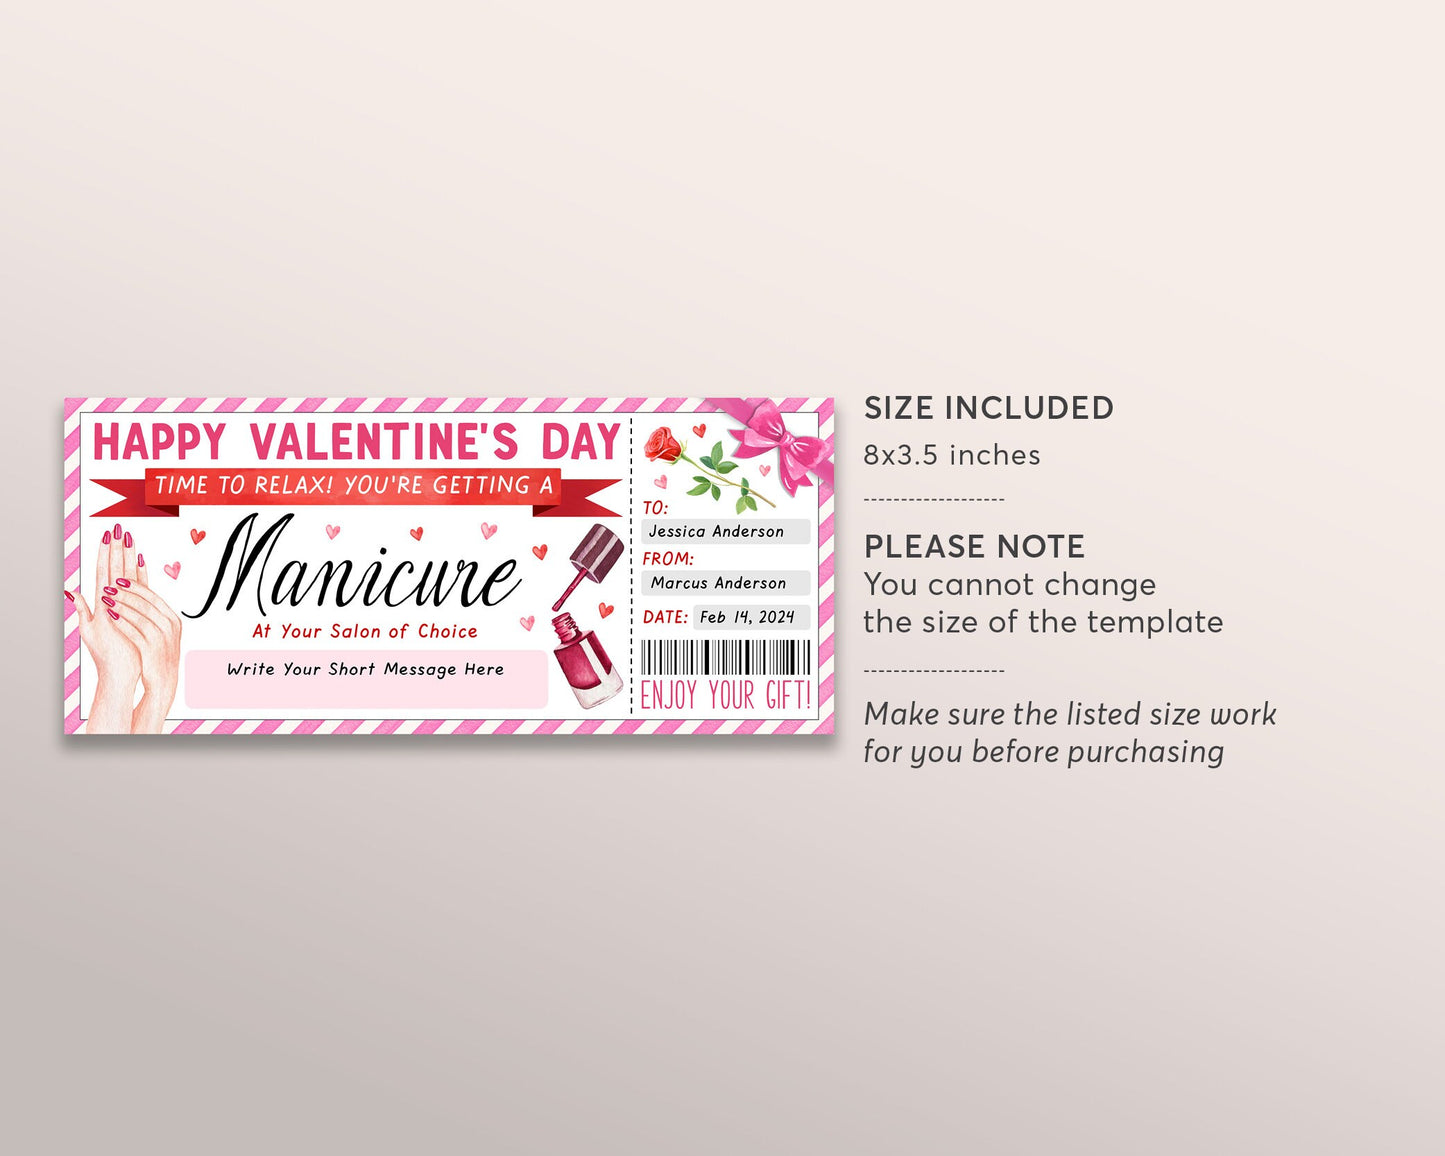 Valentines Day Manicure Ticket Editable Template, Mani Pedi Gift Certificate For Girlfriend Wife, Nail Salon Spa Day Voucher Coupon